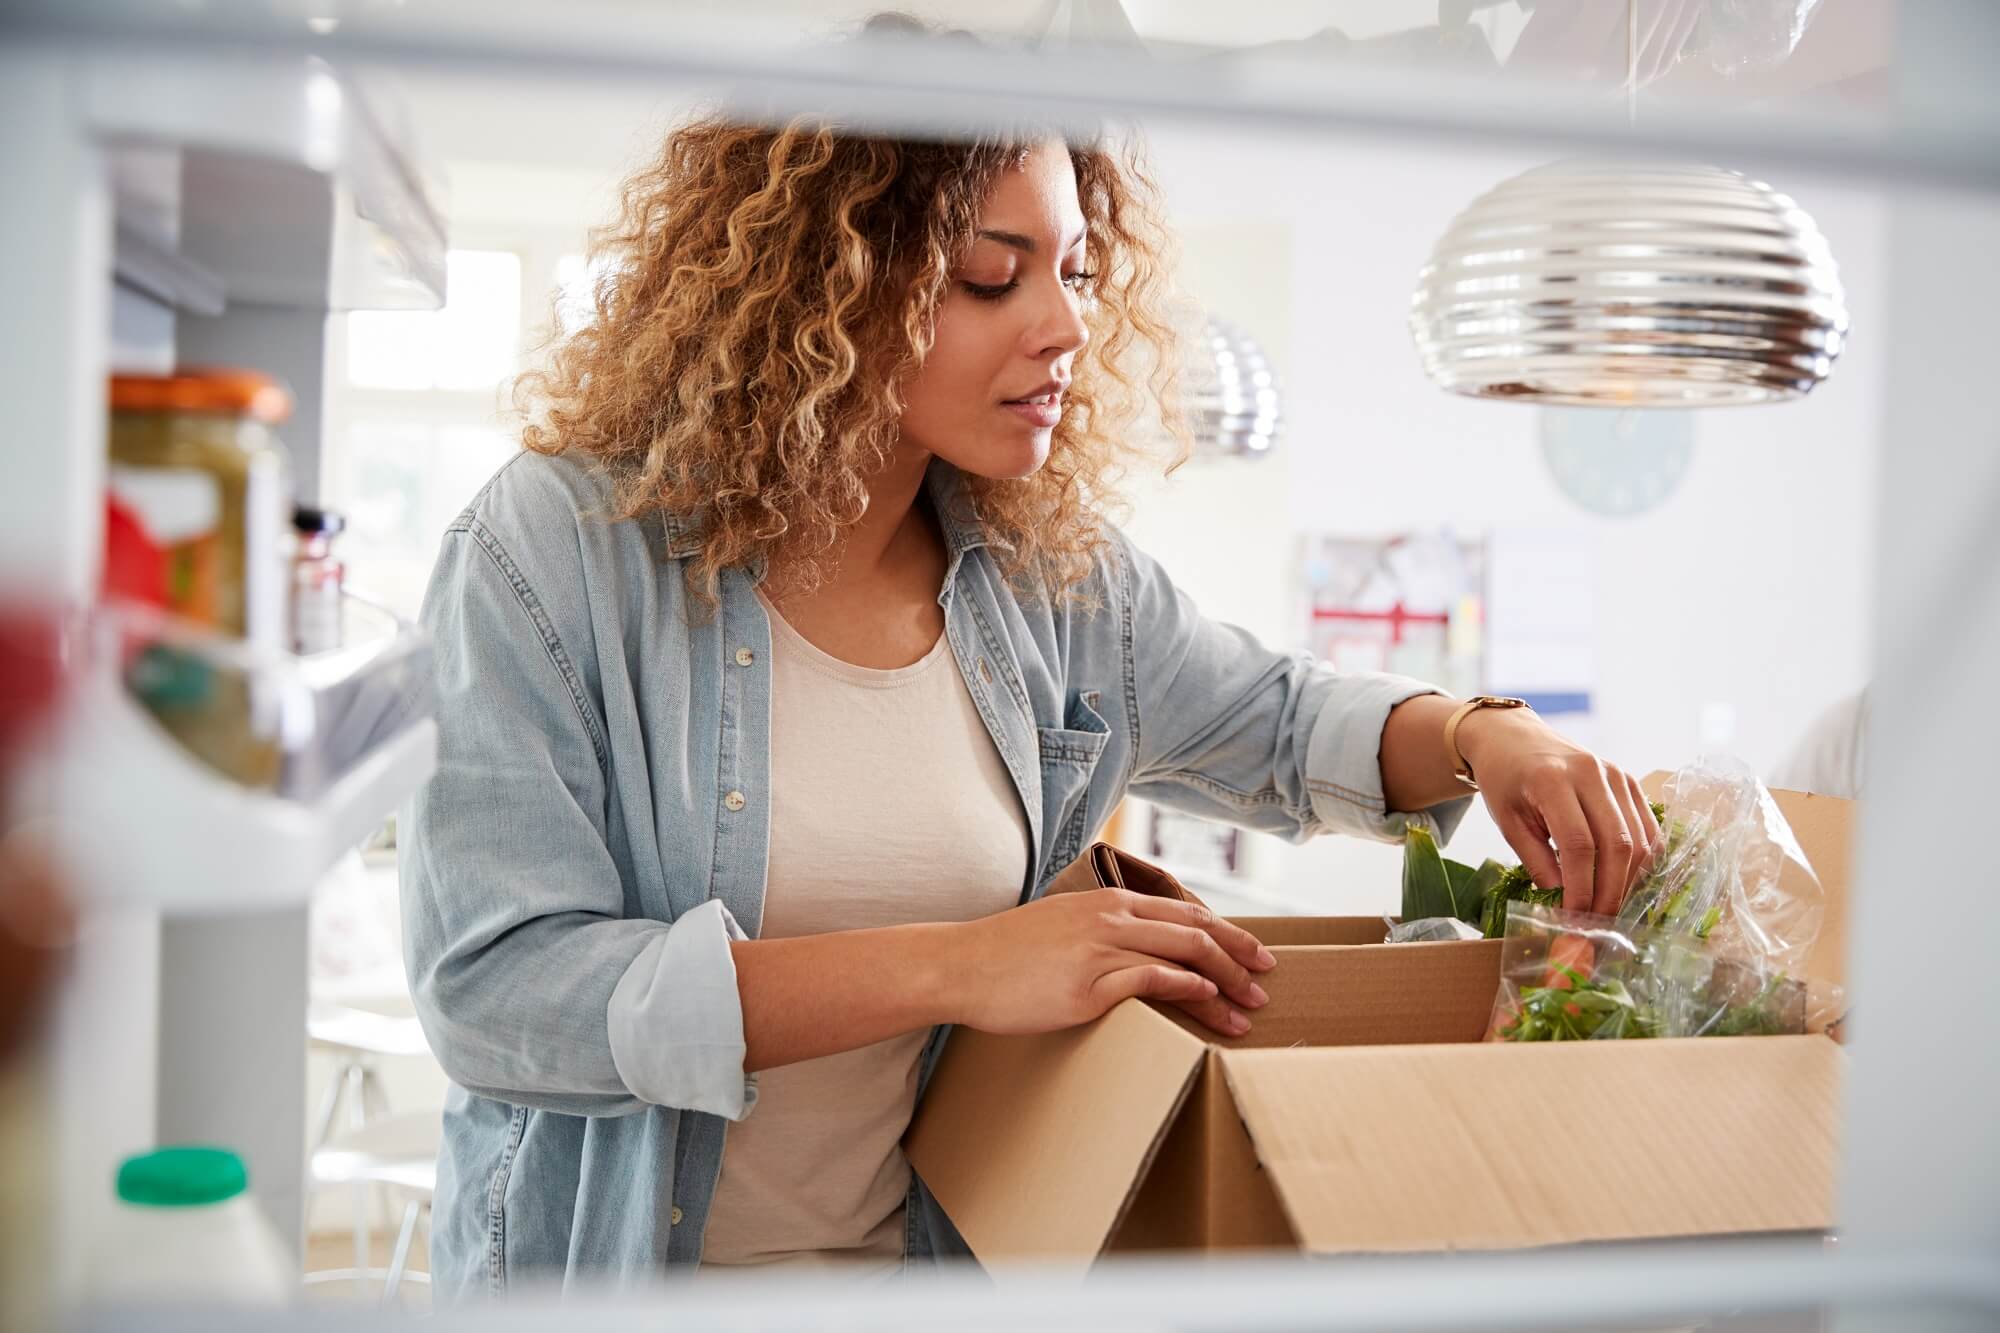 View Looking Out From Inside Of Refrigerator As Woman Unpacks Meal kit 